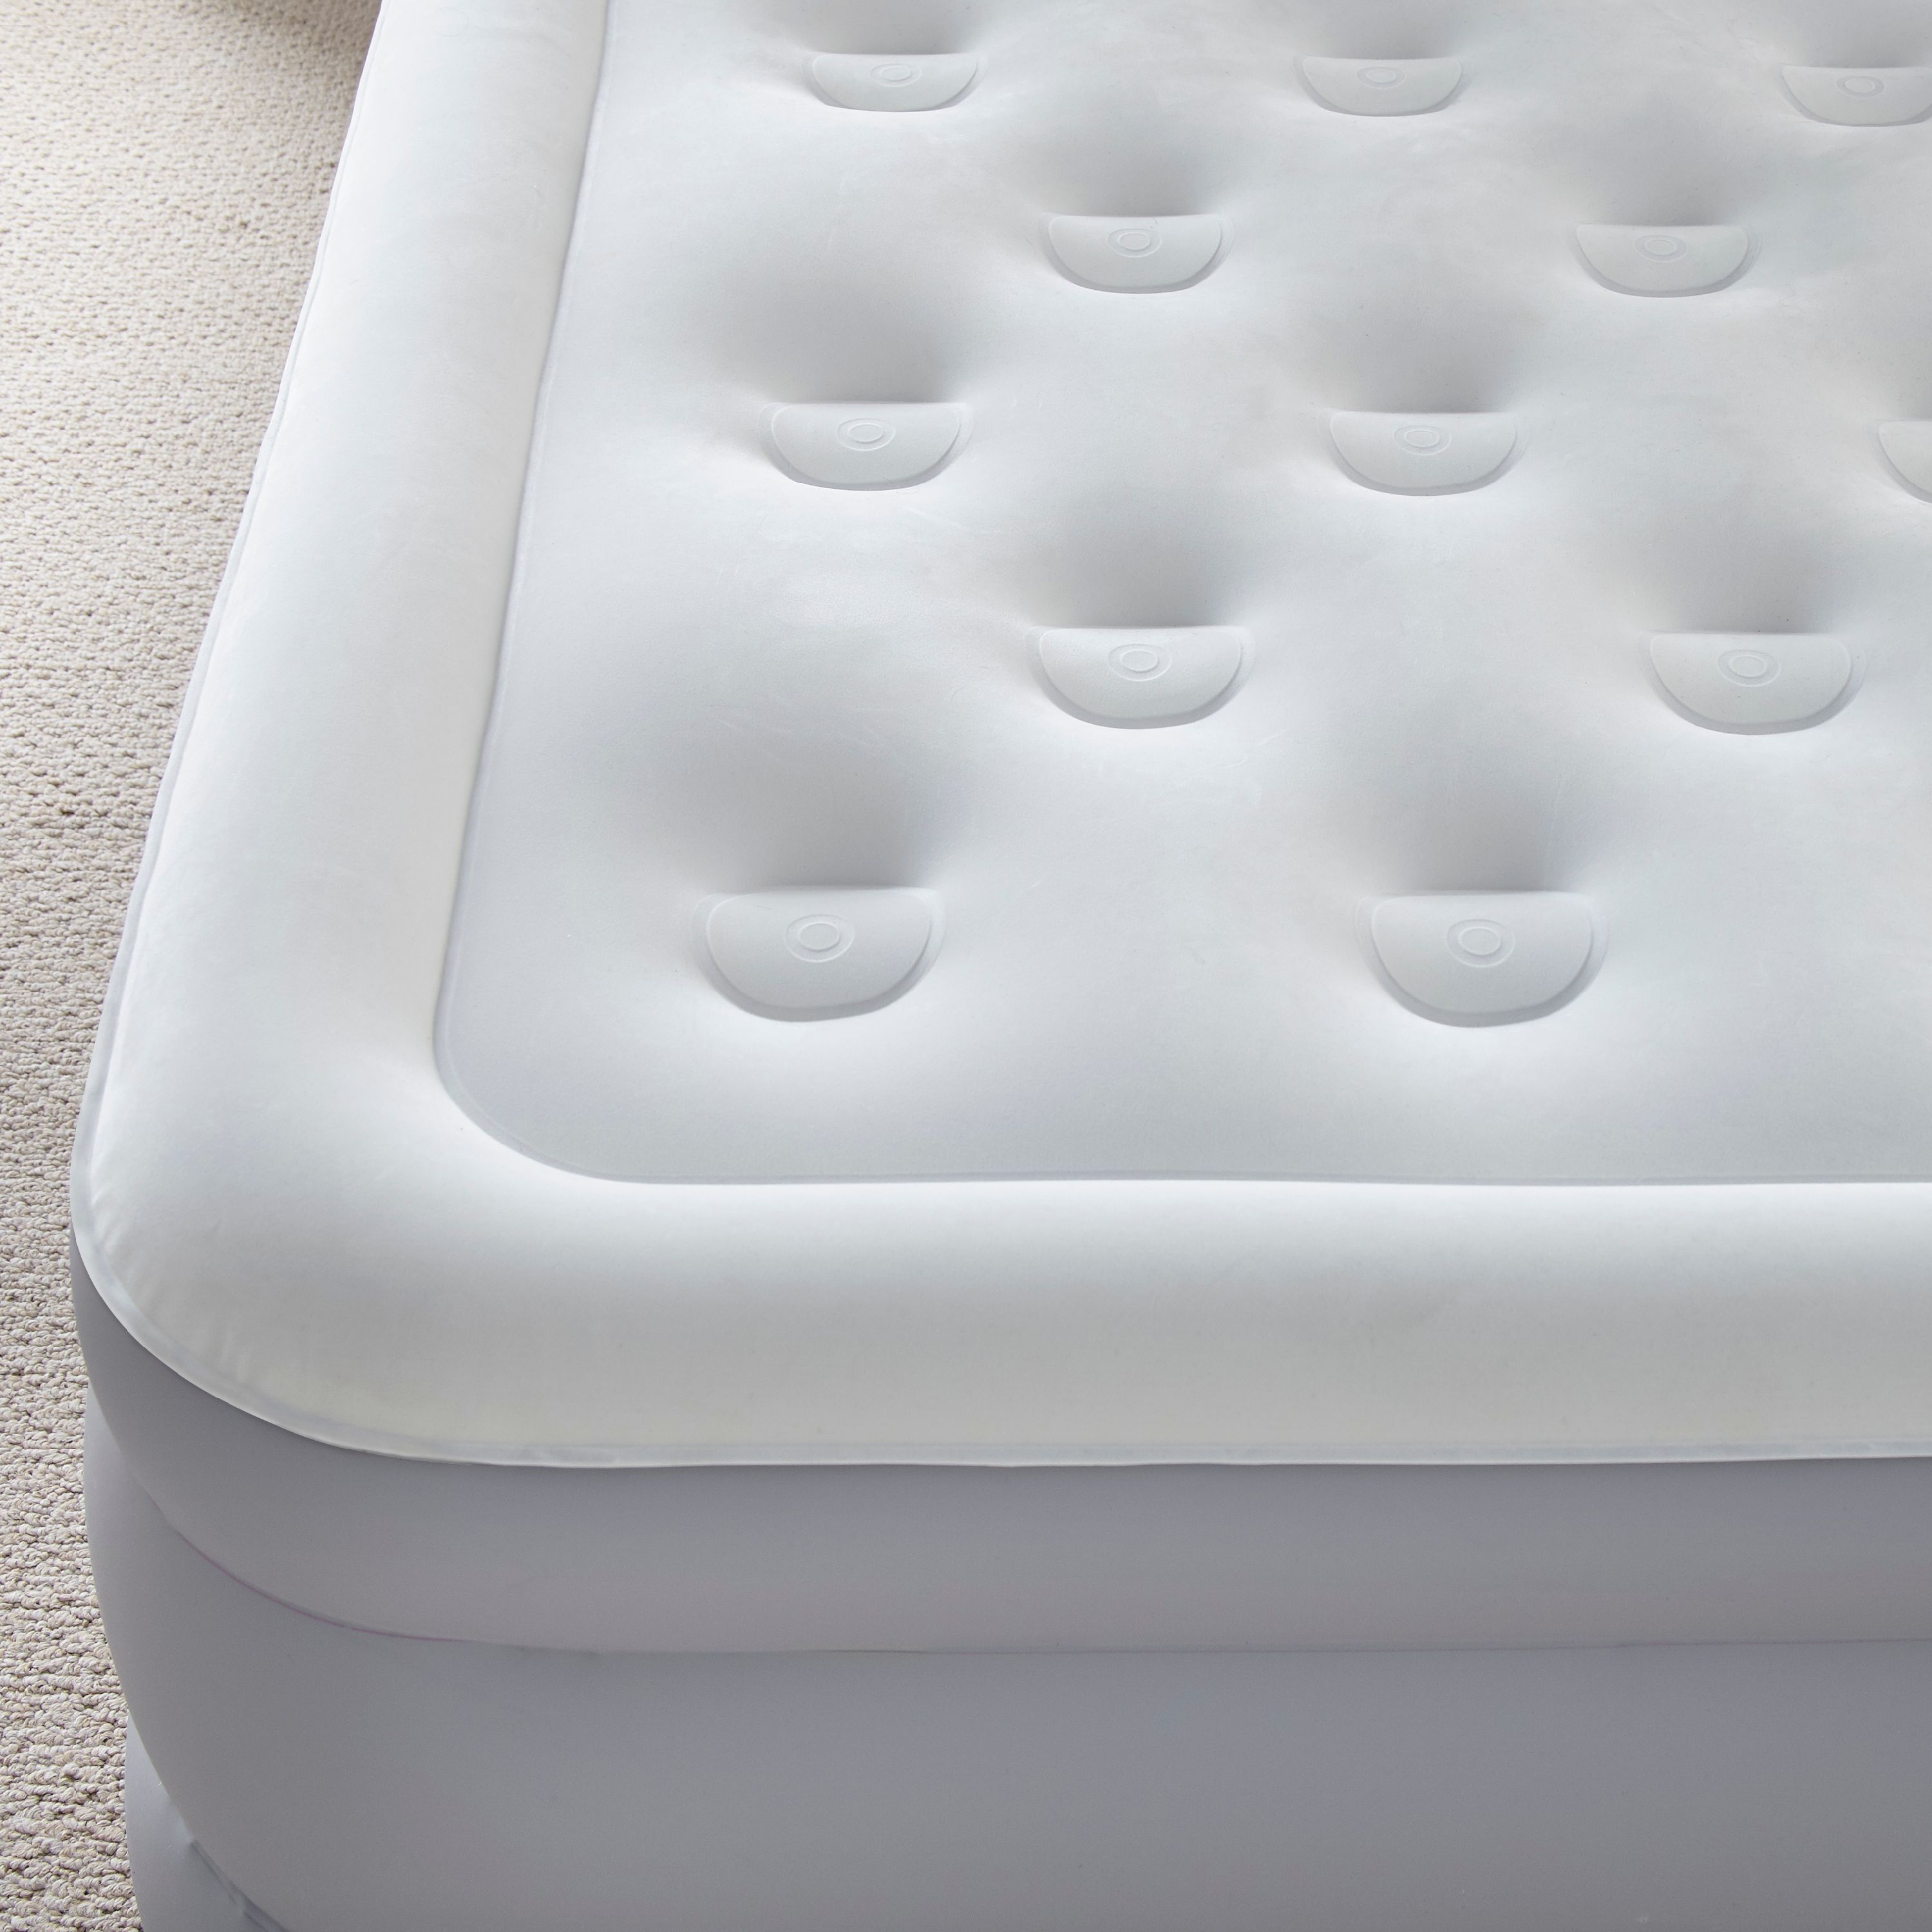 Beautyrest Everfirm 18 inch Queen Air Mattress with Built-in Pump - image 2 of 11